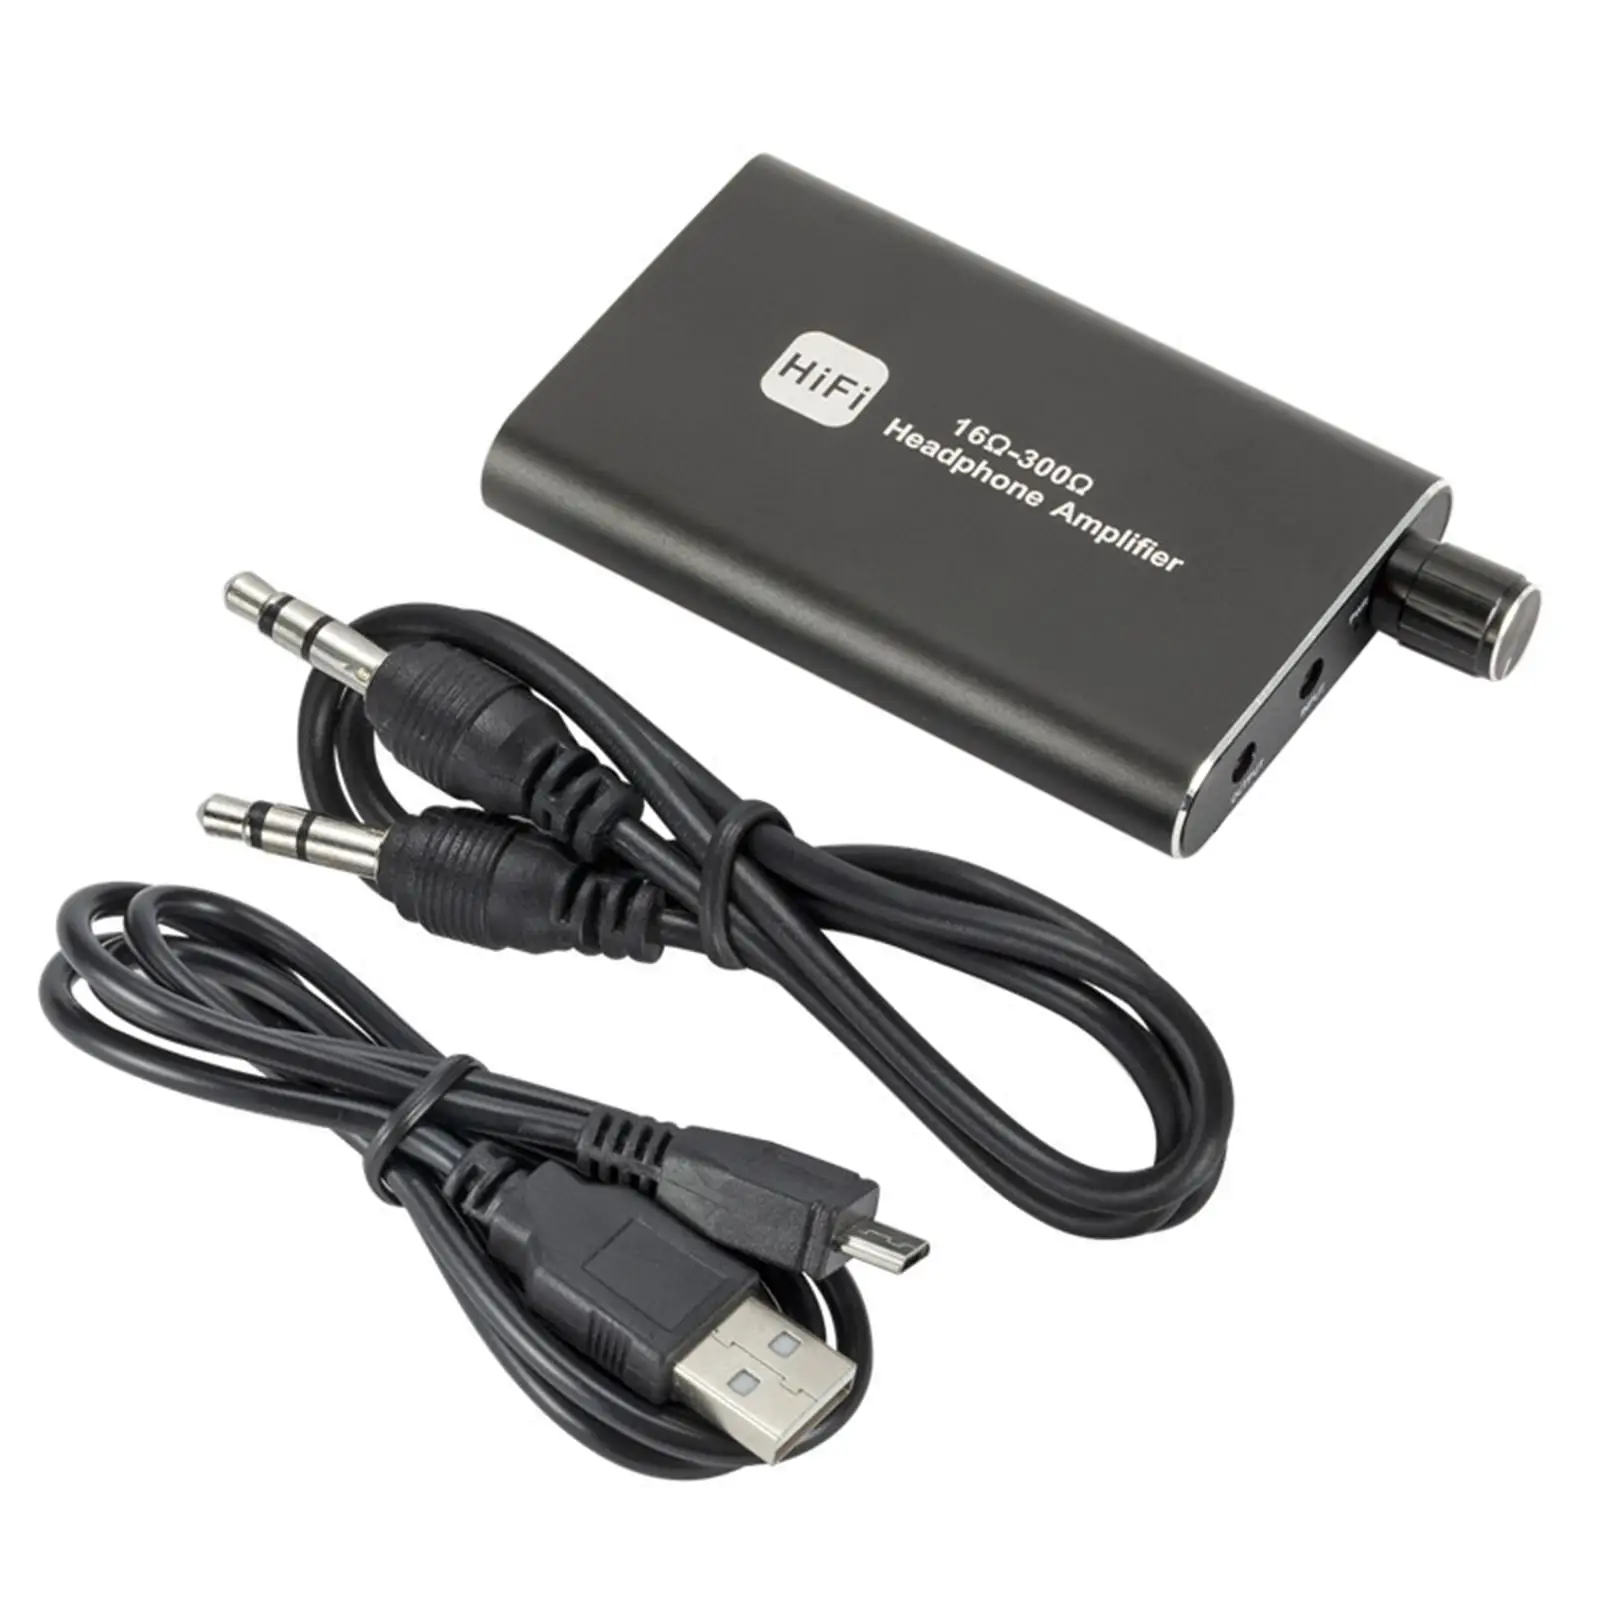 3.5mm Headphone Amplifier, Portable HiFi Headset Amplifier for MP3 MP4 Computers